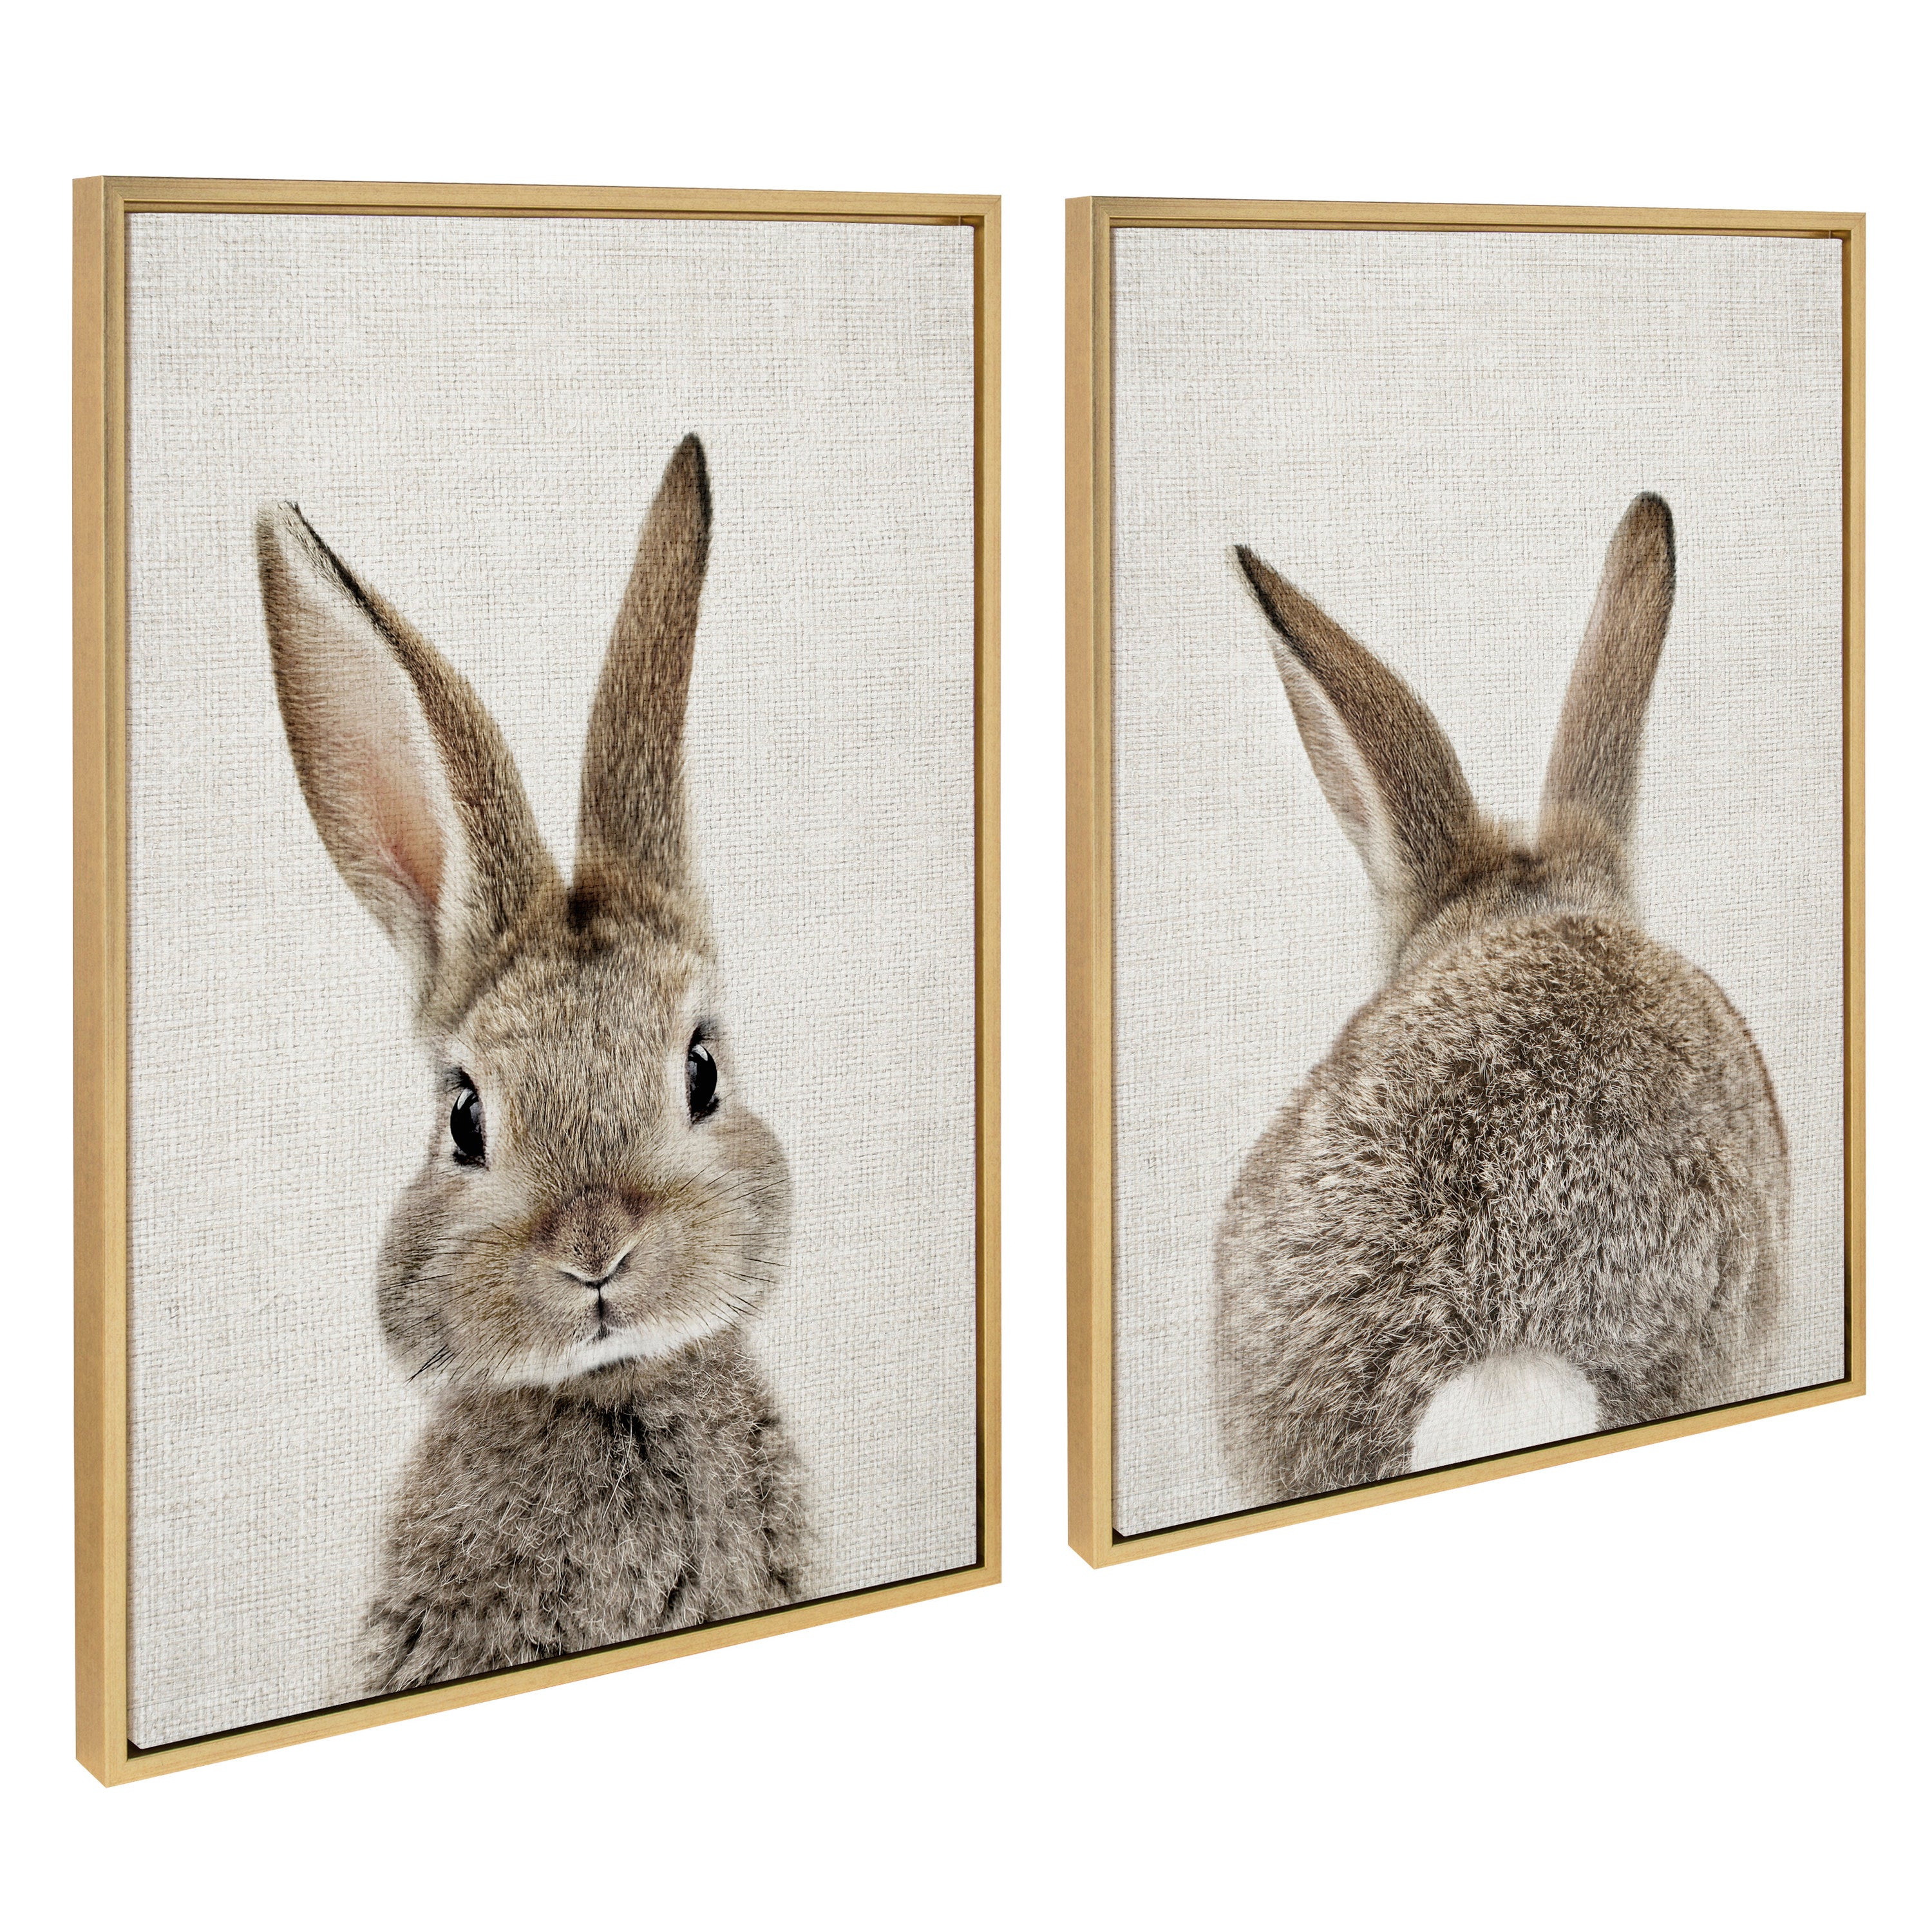 Sylvie Bunny Portrait on Linen and Bunny Tail on Linen Framed Canvas Art Set by Amy Peterson Art Studio